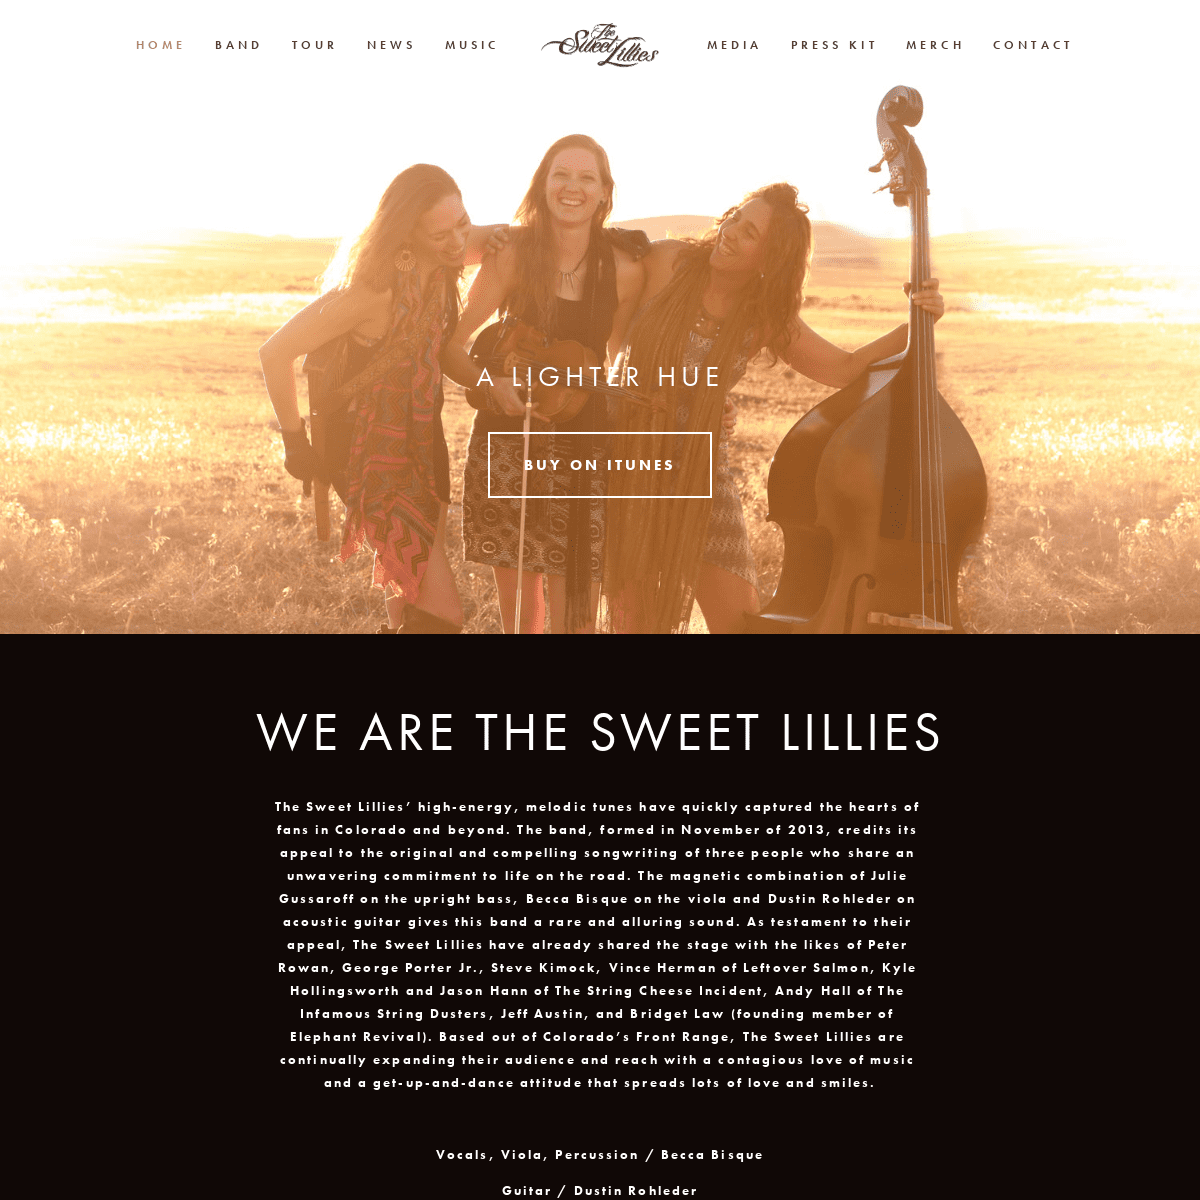 A complete backup of sweetlillies.com